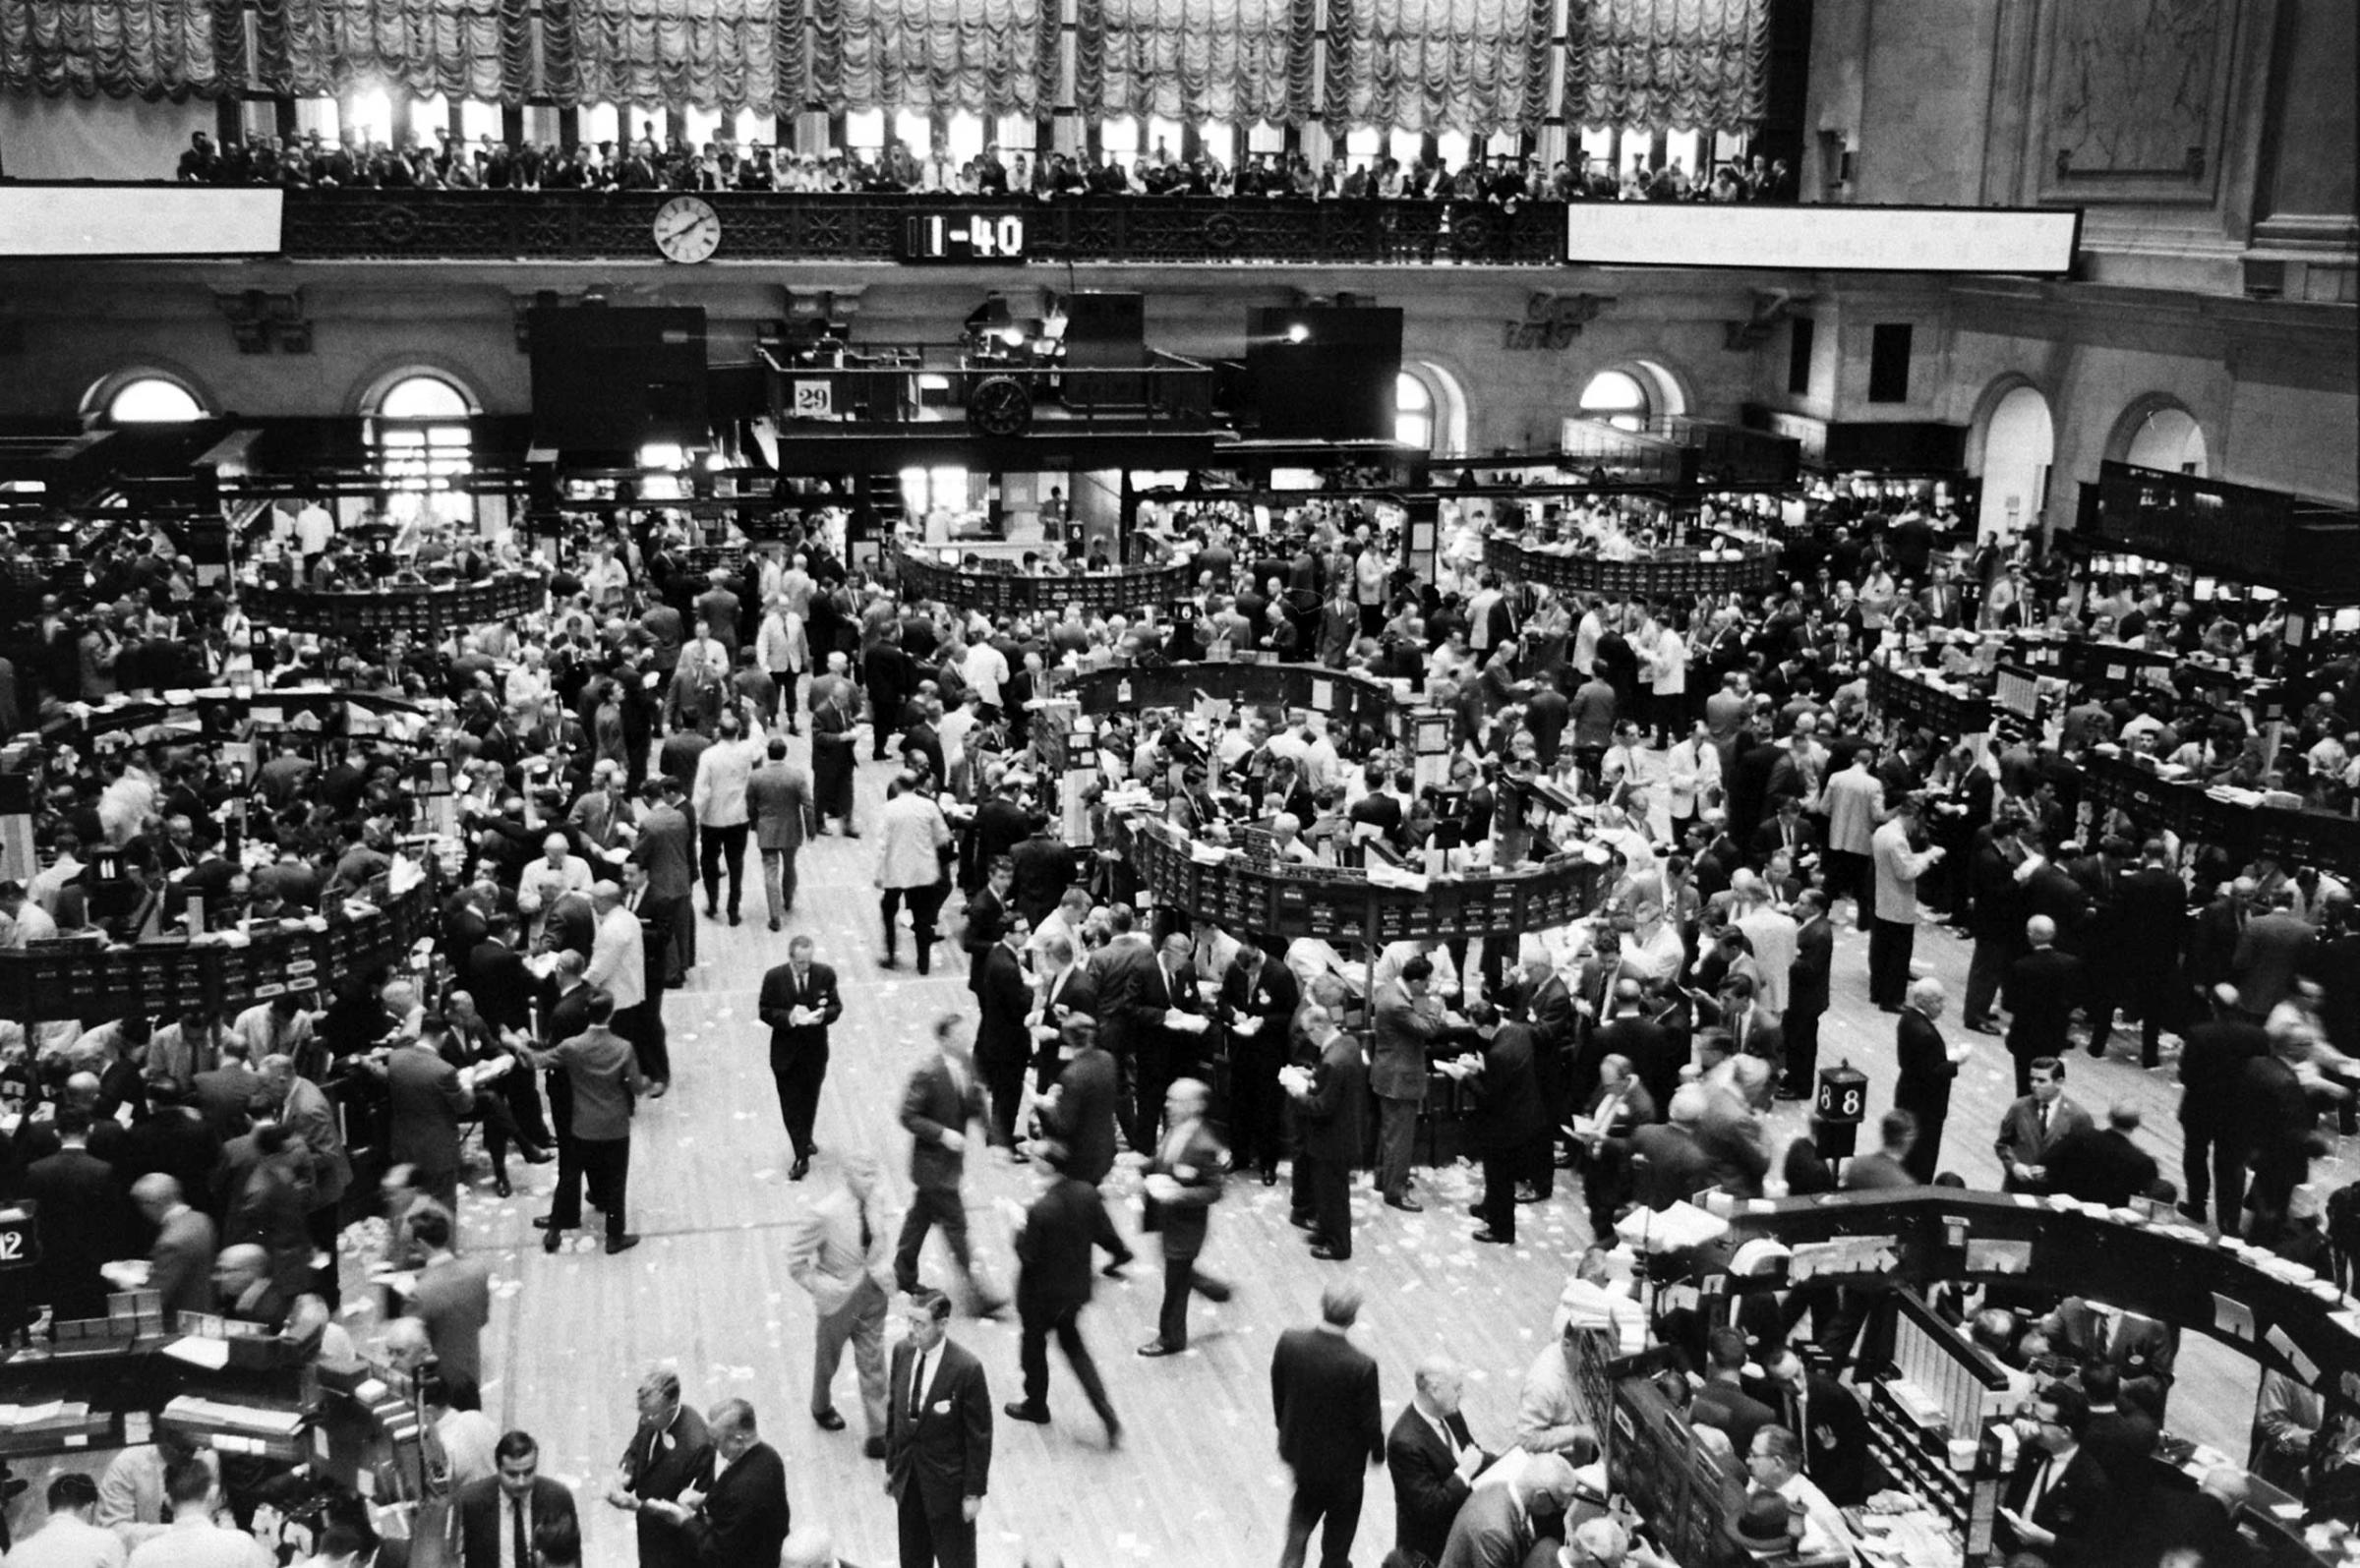 Caption to very similar picture in June 8, 1962, issue of LIFE. "Floor of New York Stock Exchange boils with frenzy of an overheated pot at closing time Tuesday, trying to catch up with transactions which hit nearly 15 million shares for day, highest total since 1929."